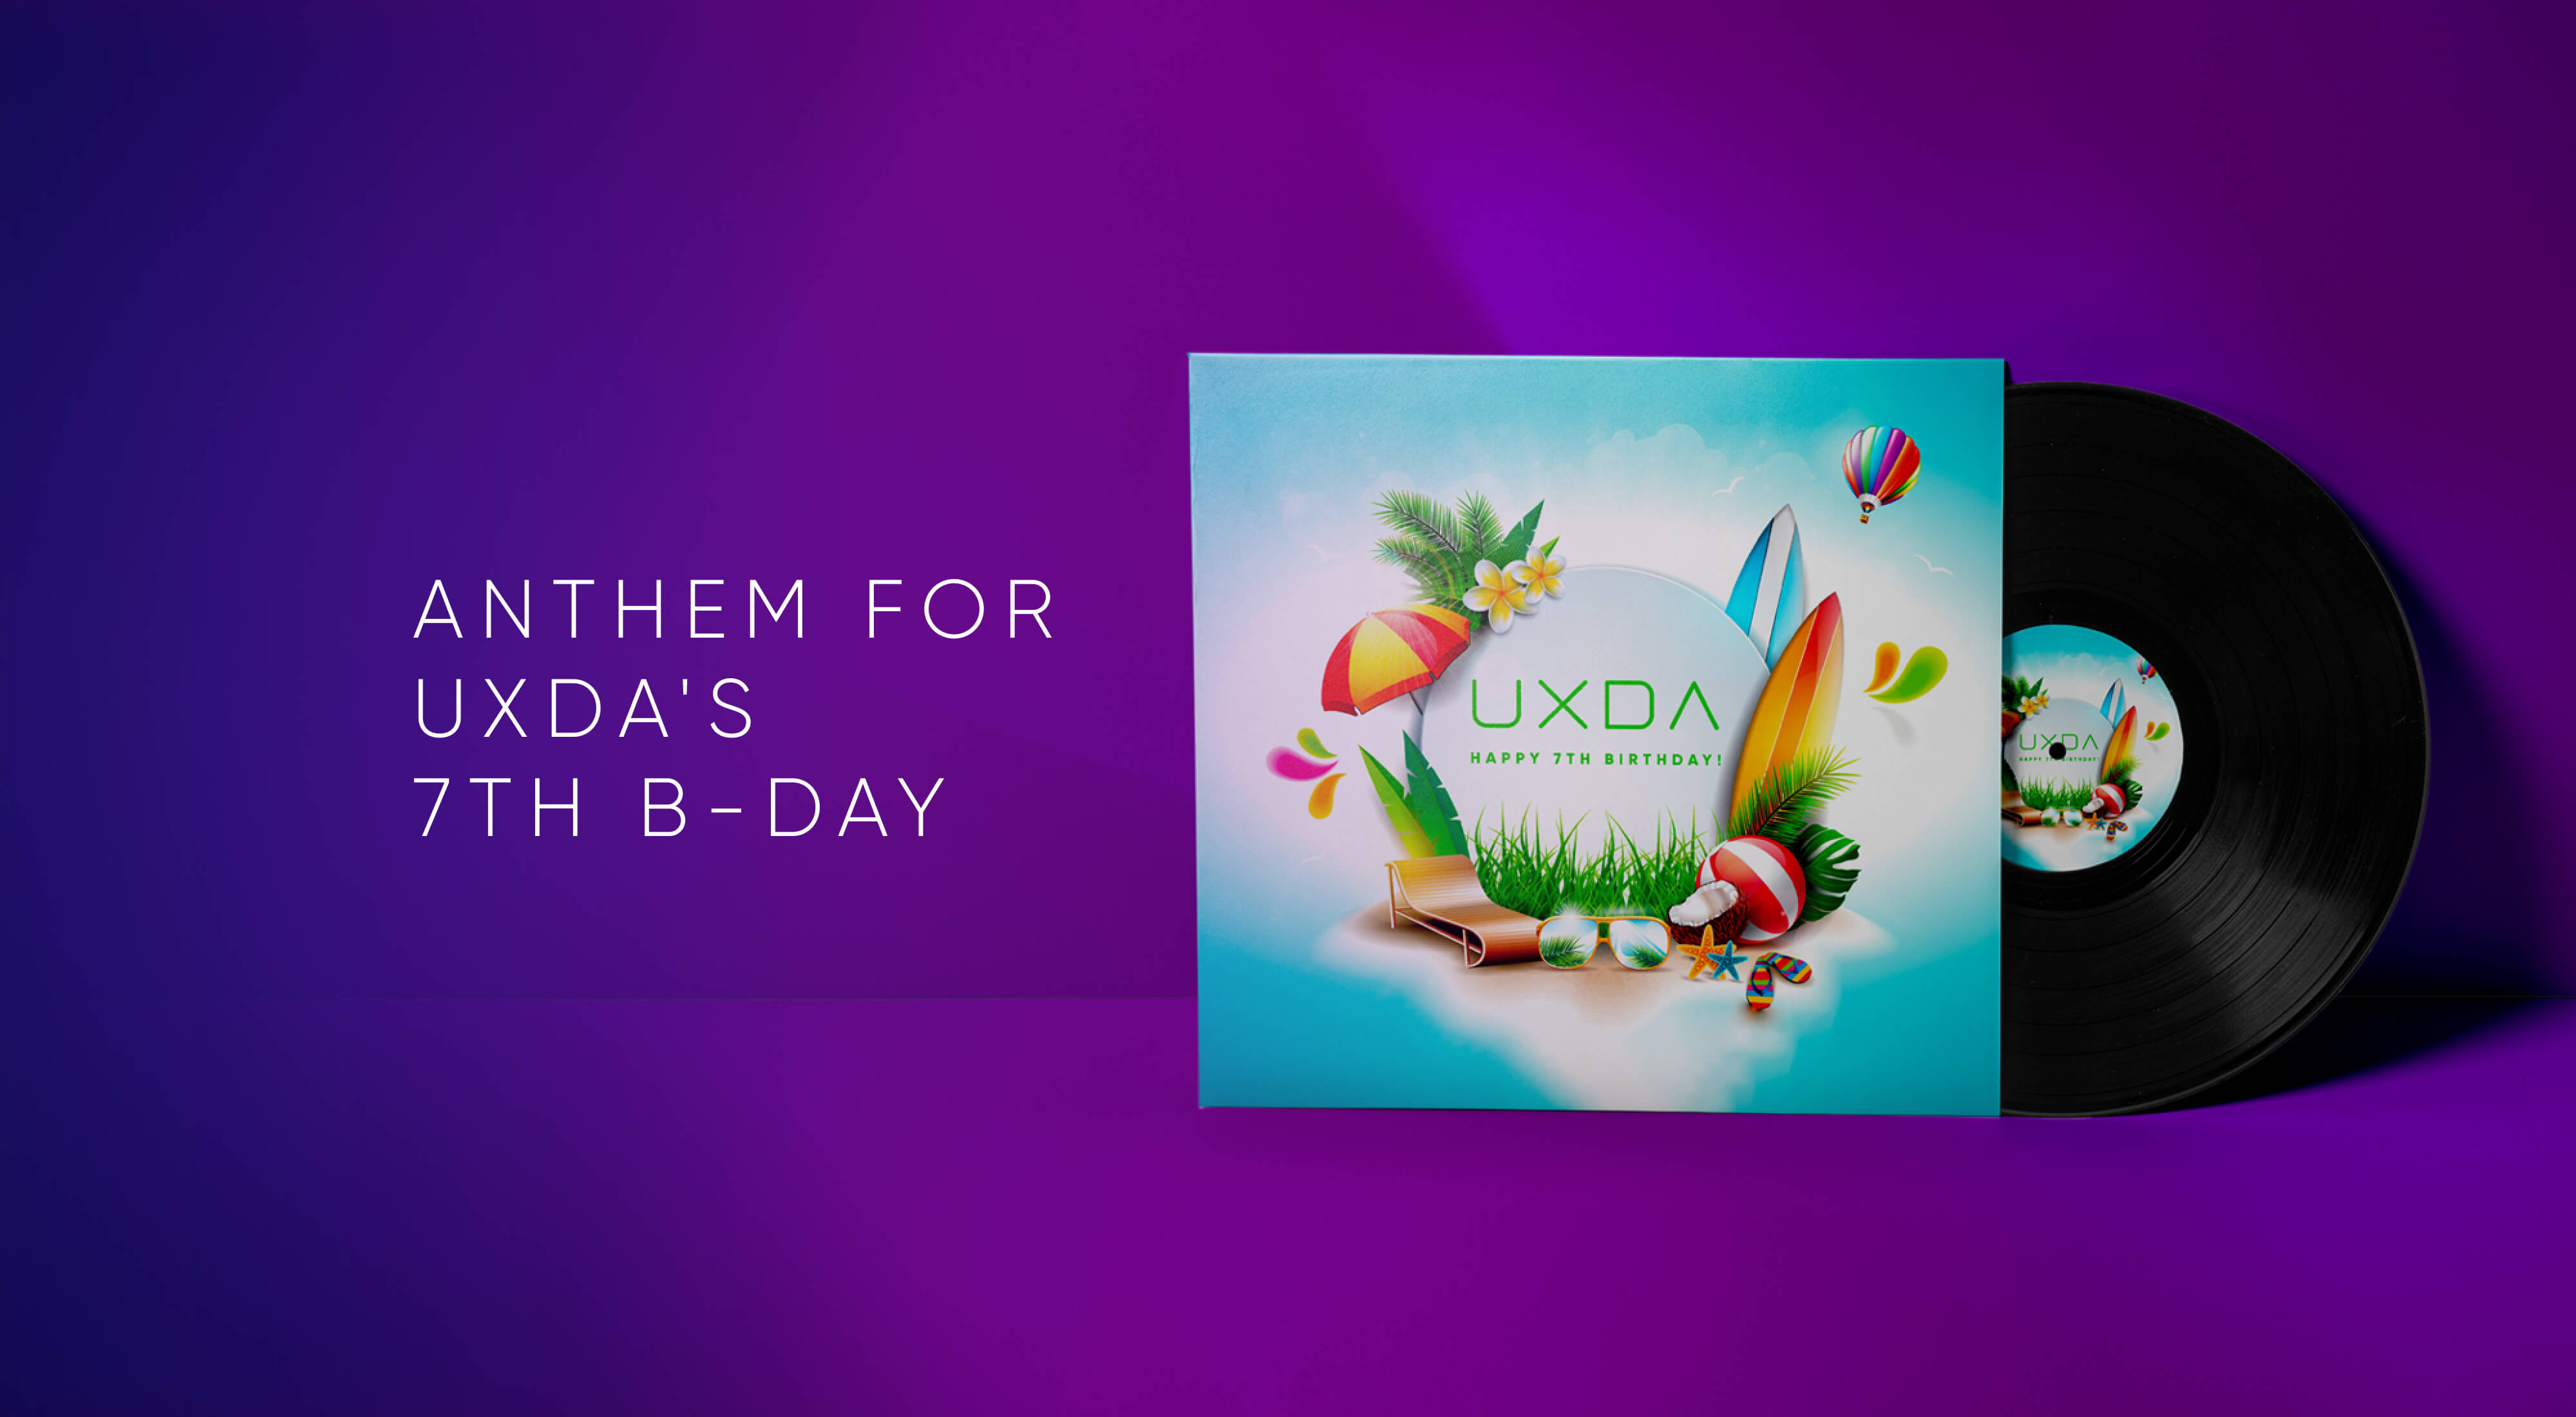 Anthem for UXDA's B-day: World Class Achievements Within 7 Years